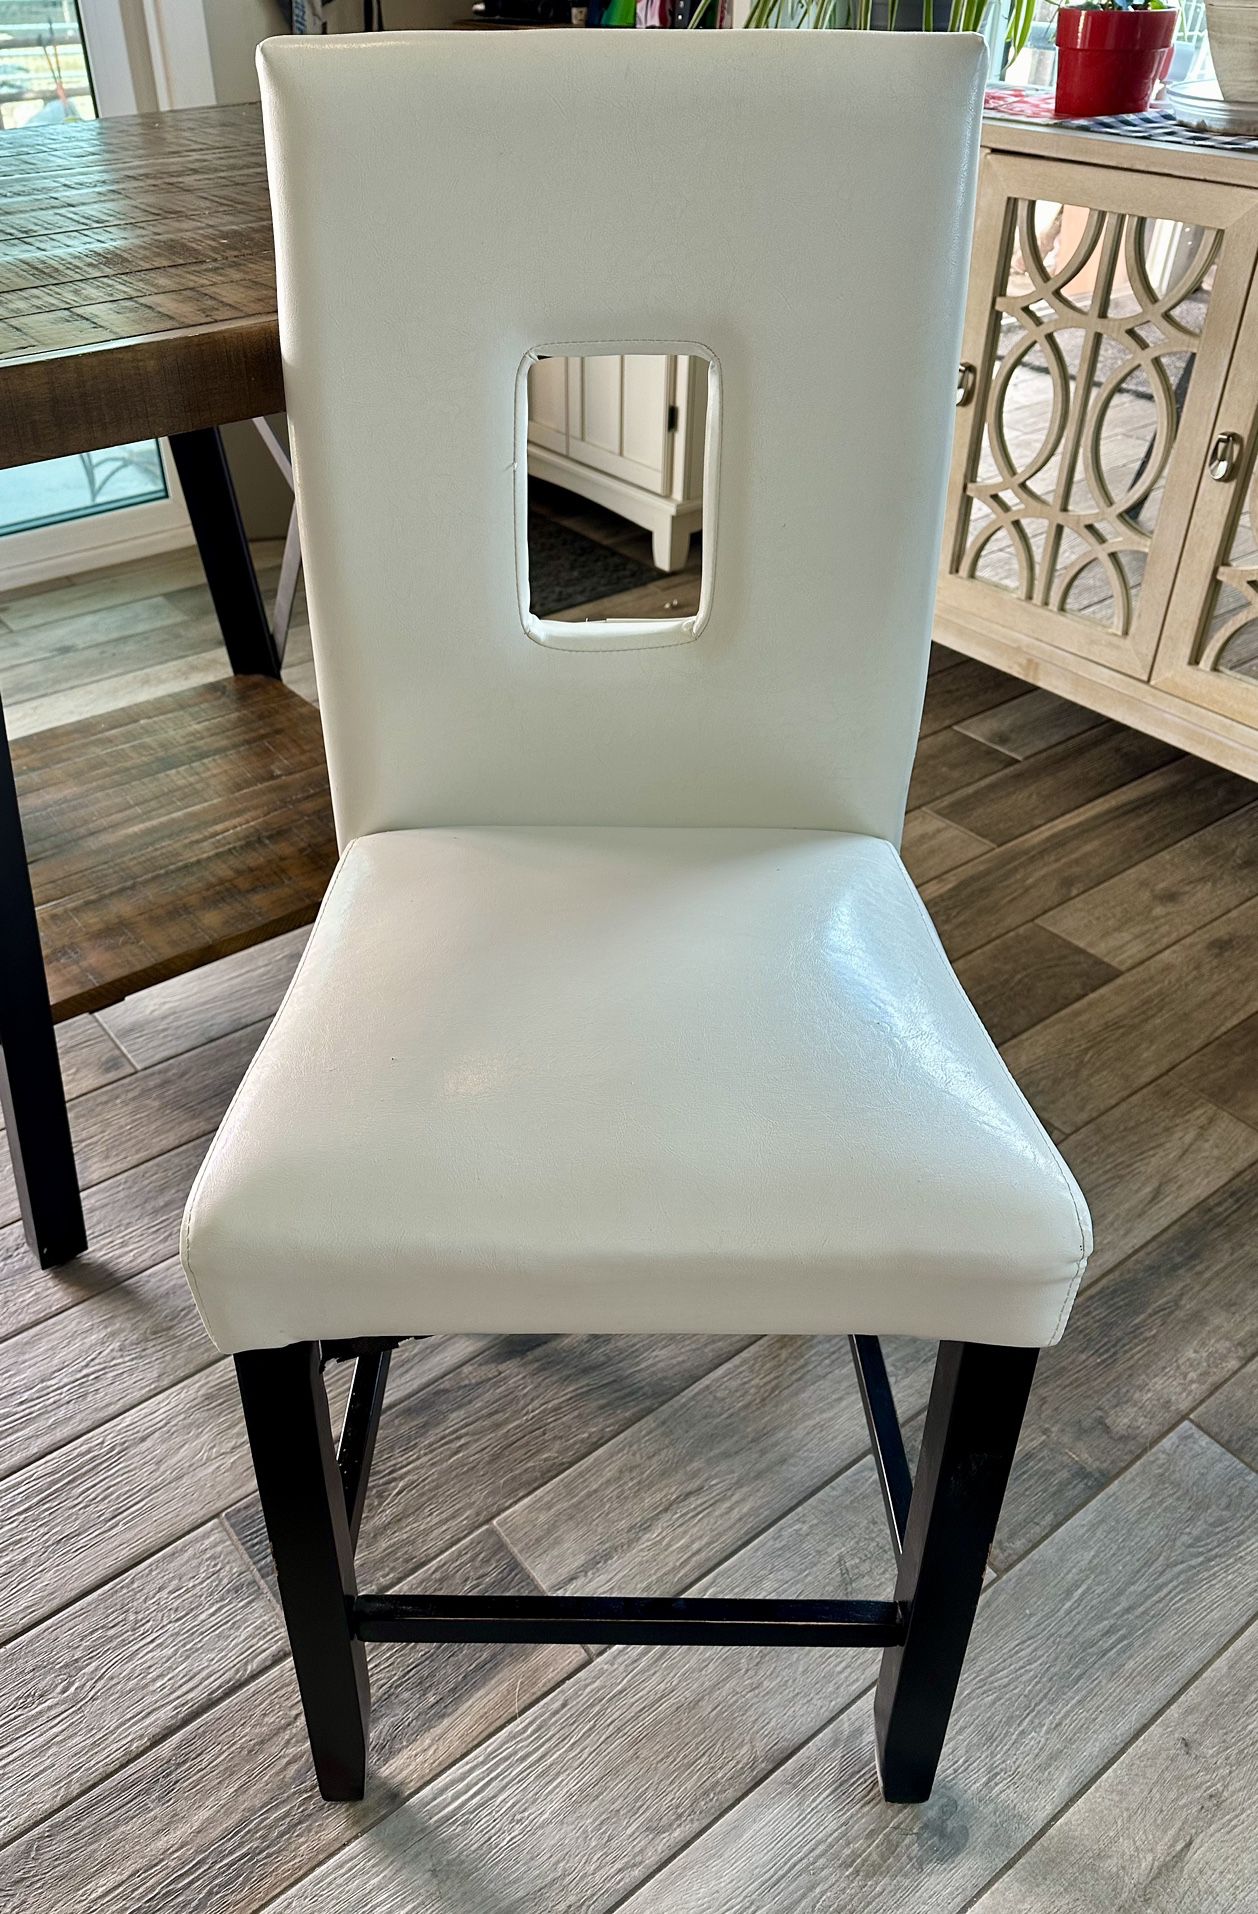 Countertop Hight Dining Chairs